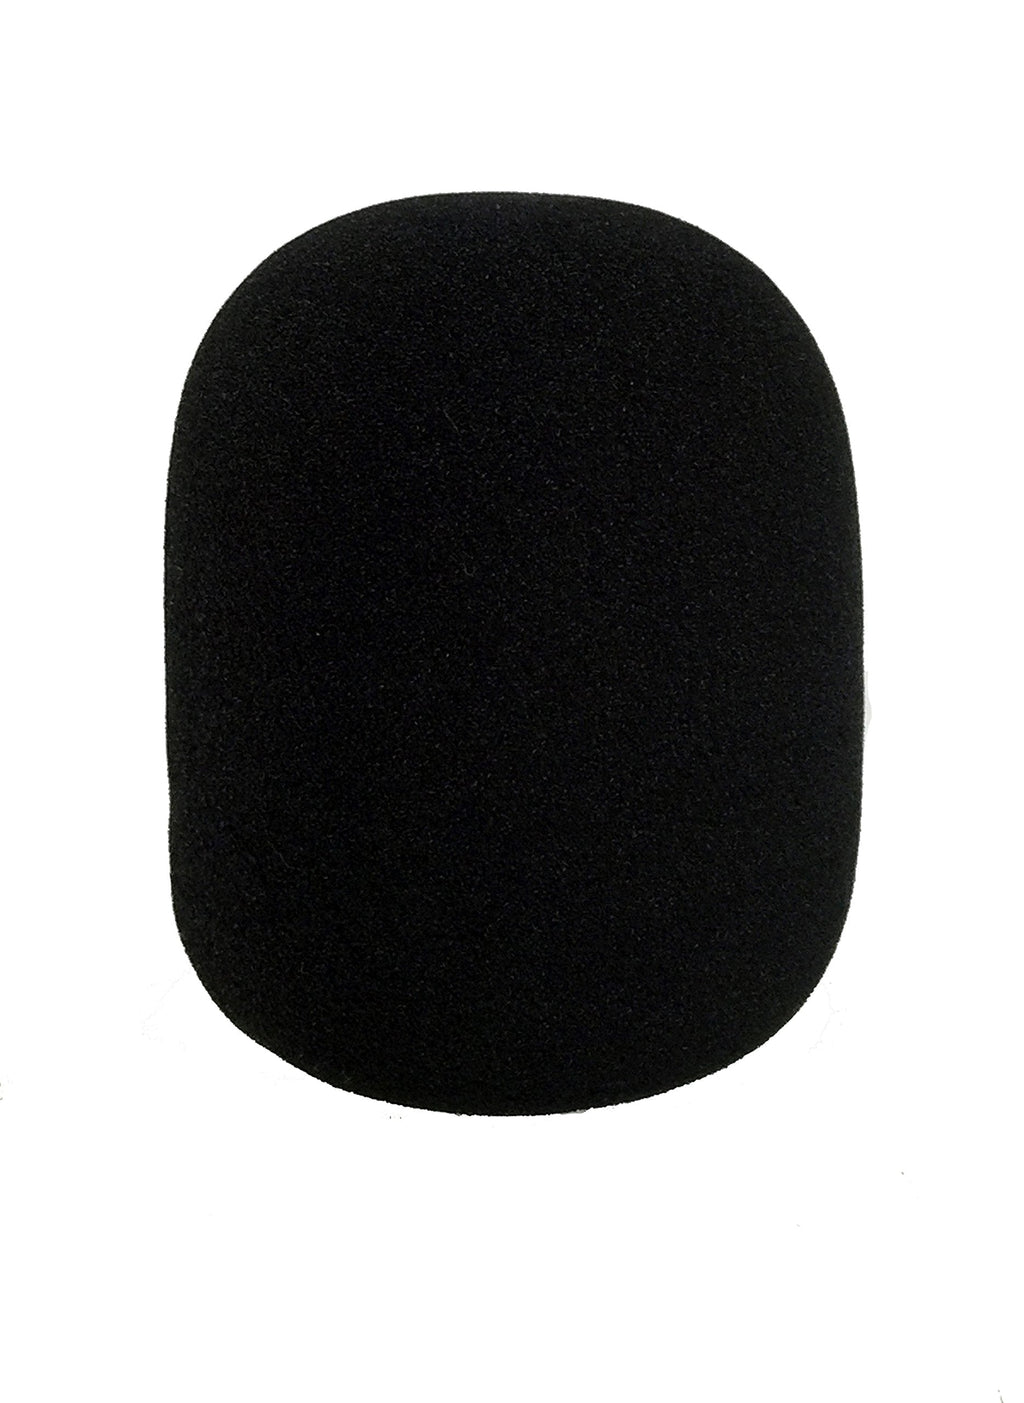  [AUSTRALIA] - Tetra-Teknica Essentials Series XLWS-1P Extra Large Microphone Windscreen for Blue Yeti, MXL, Audio Technica, and Other Large USB Microphones, Color Black